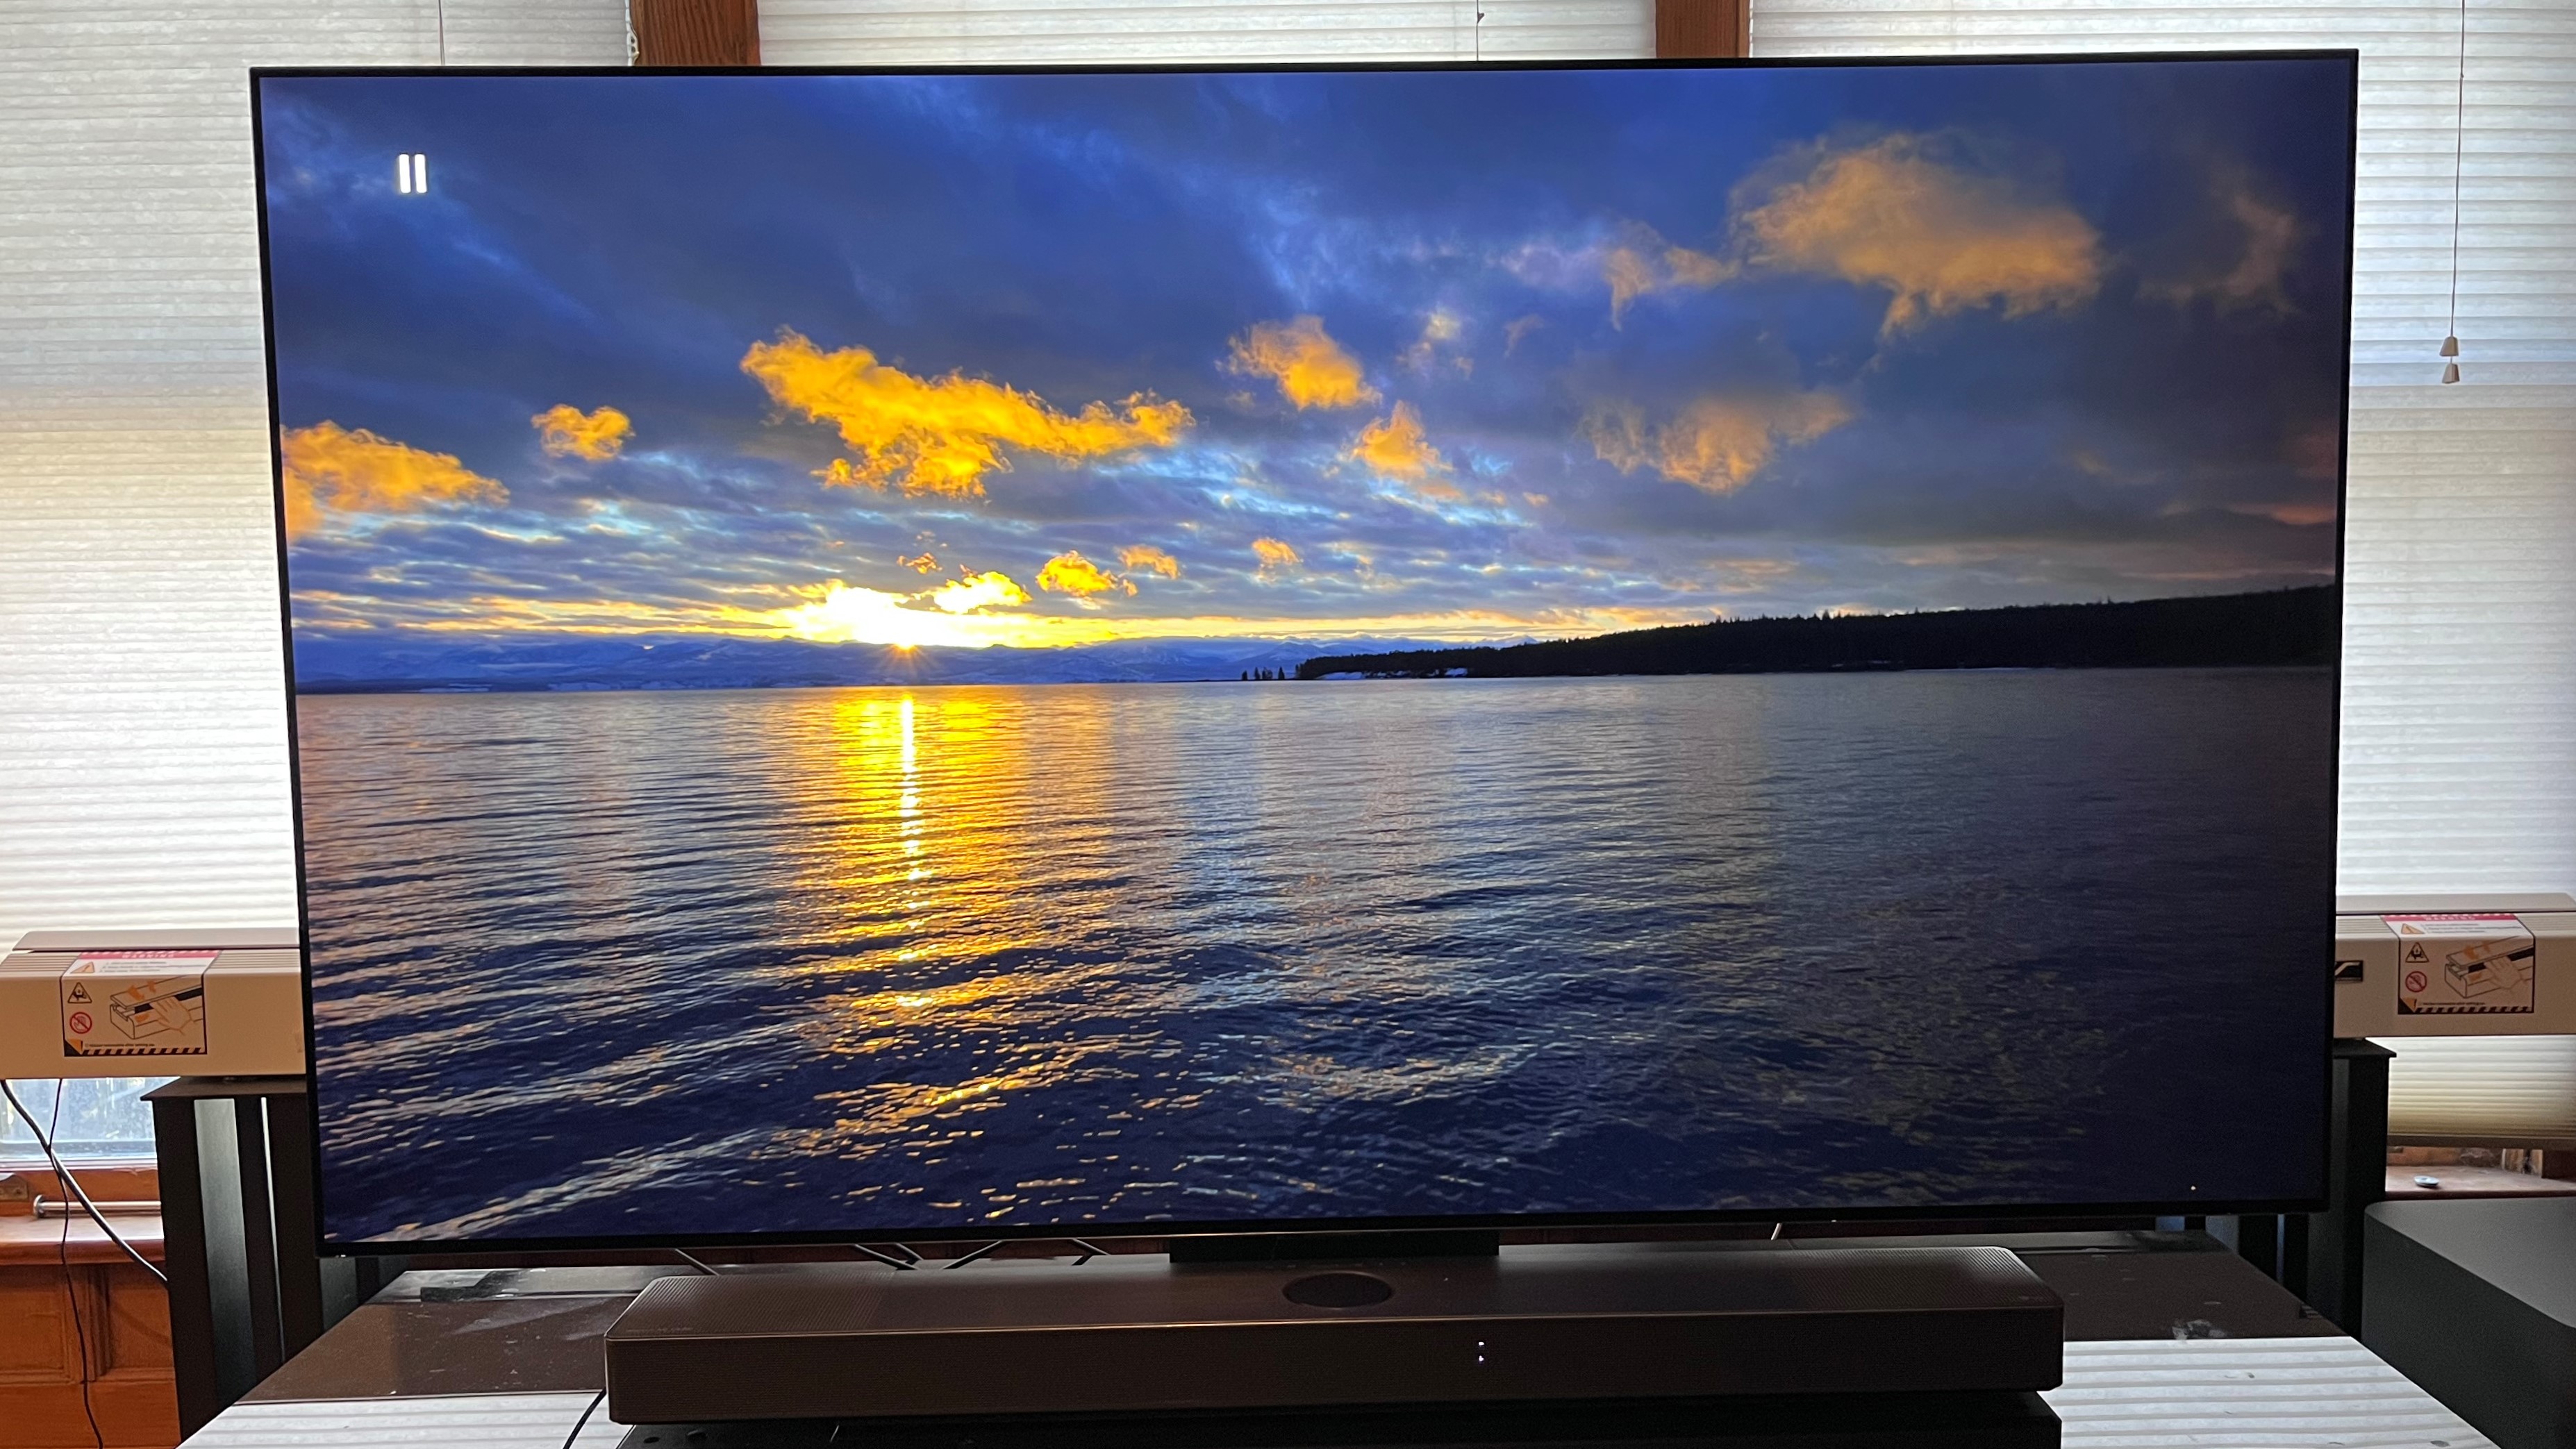 LG C3 OLED TV showing image of sunset on water onscreen